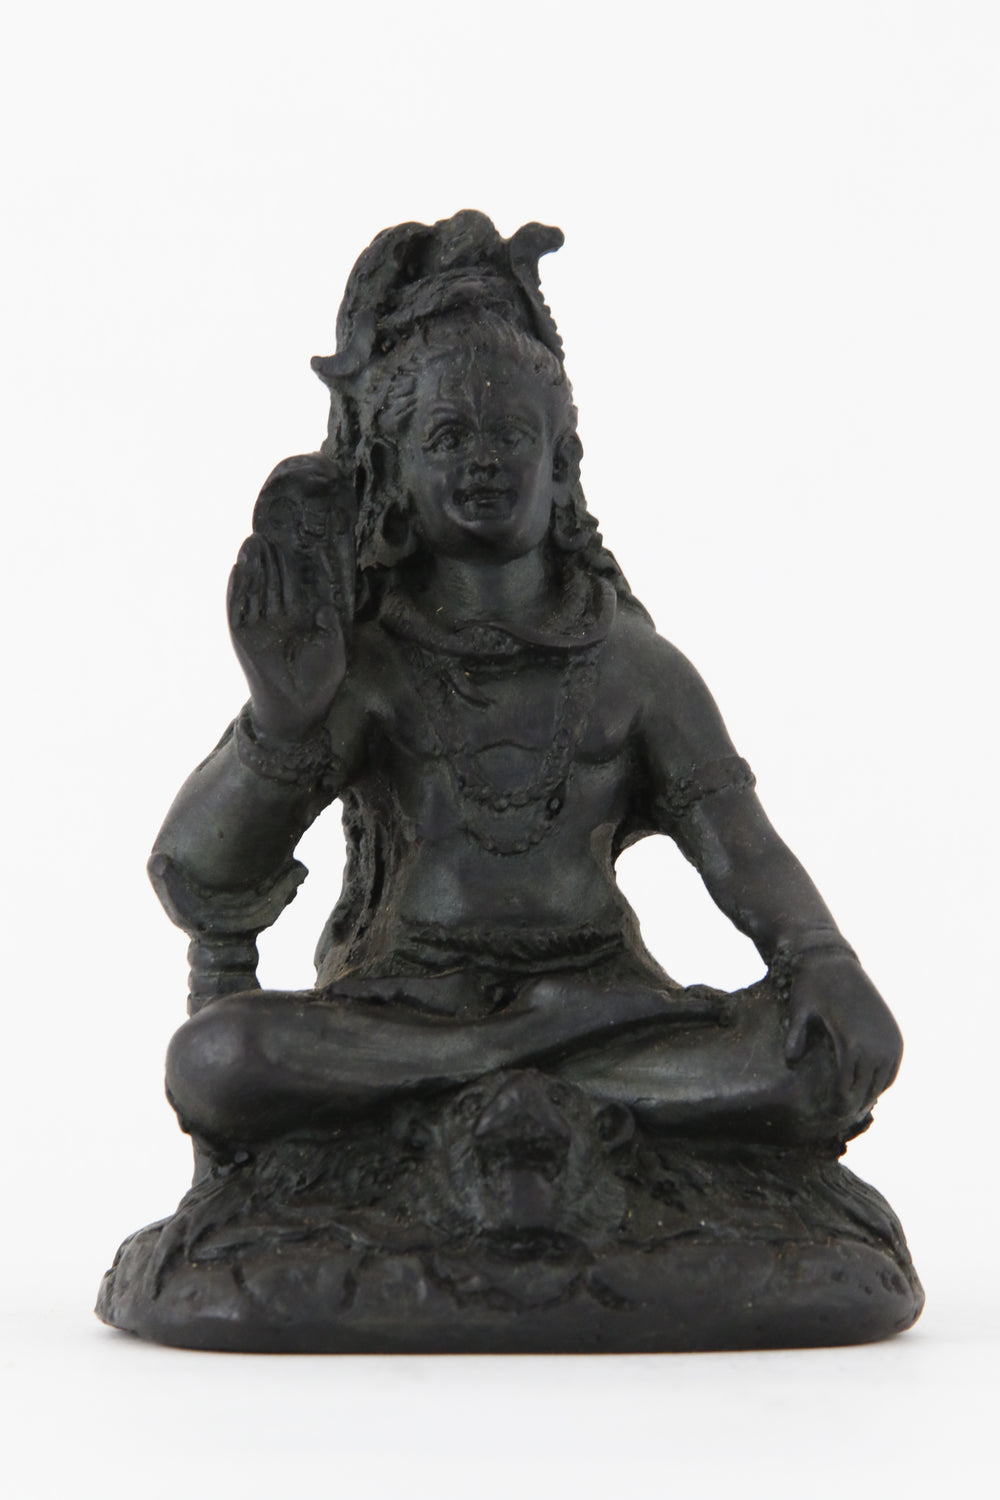 SHIVA BLESSING STATUE DARK SMALL SIZE FRONT VIEW